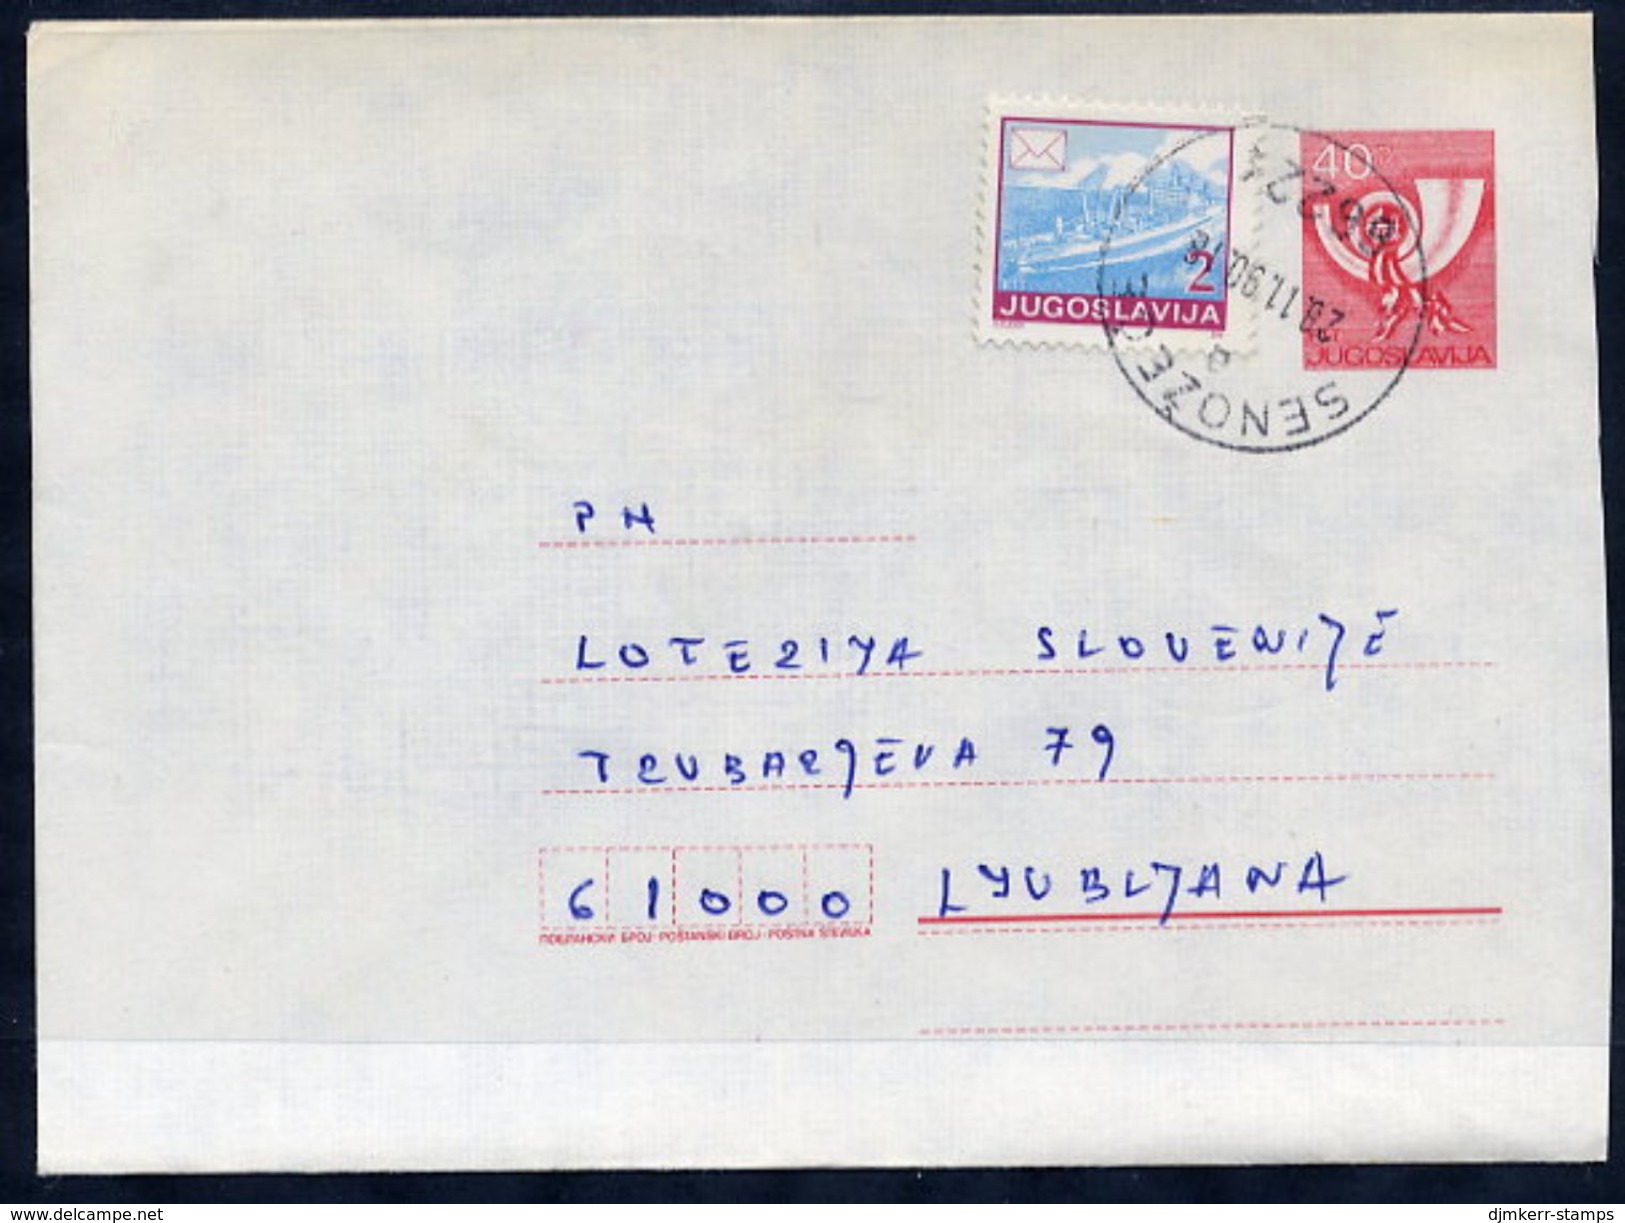 YUGOSLAVIA 1986 Posthorn 40 D.stationery Envelope Format A  Used With Additional Franking.  Michel U76A - Ganzsachen